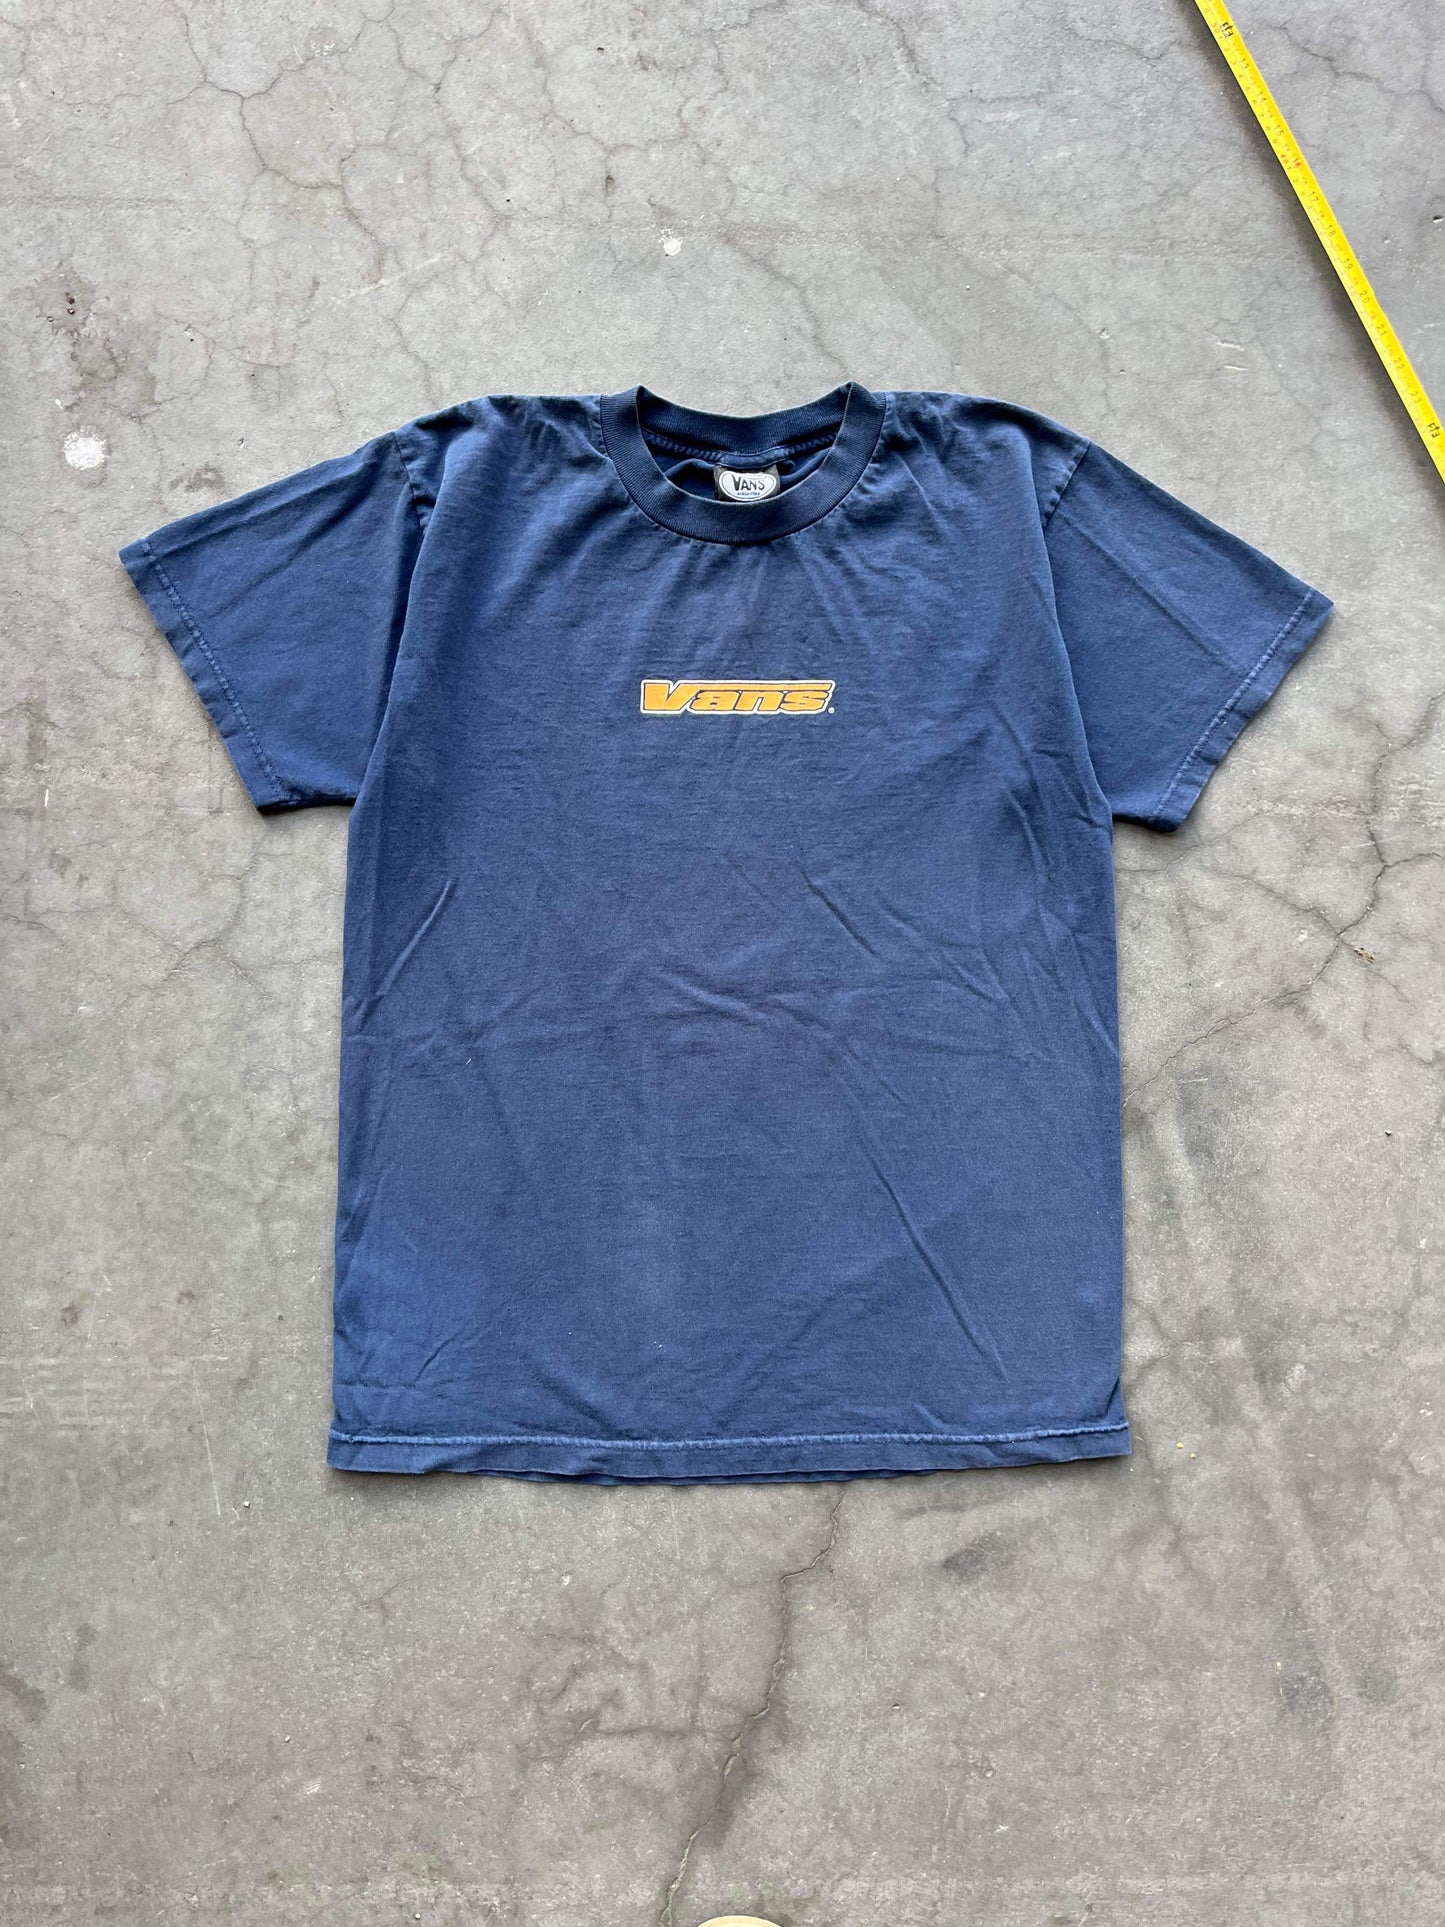 (L) 90’s Made in USA Vans Skateboards Tee